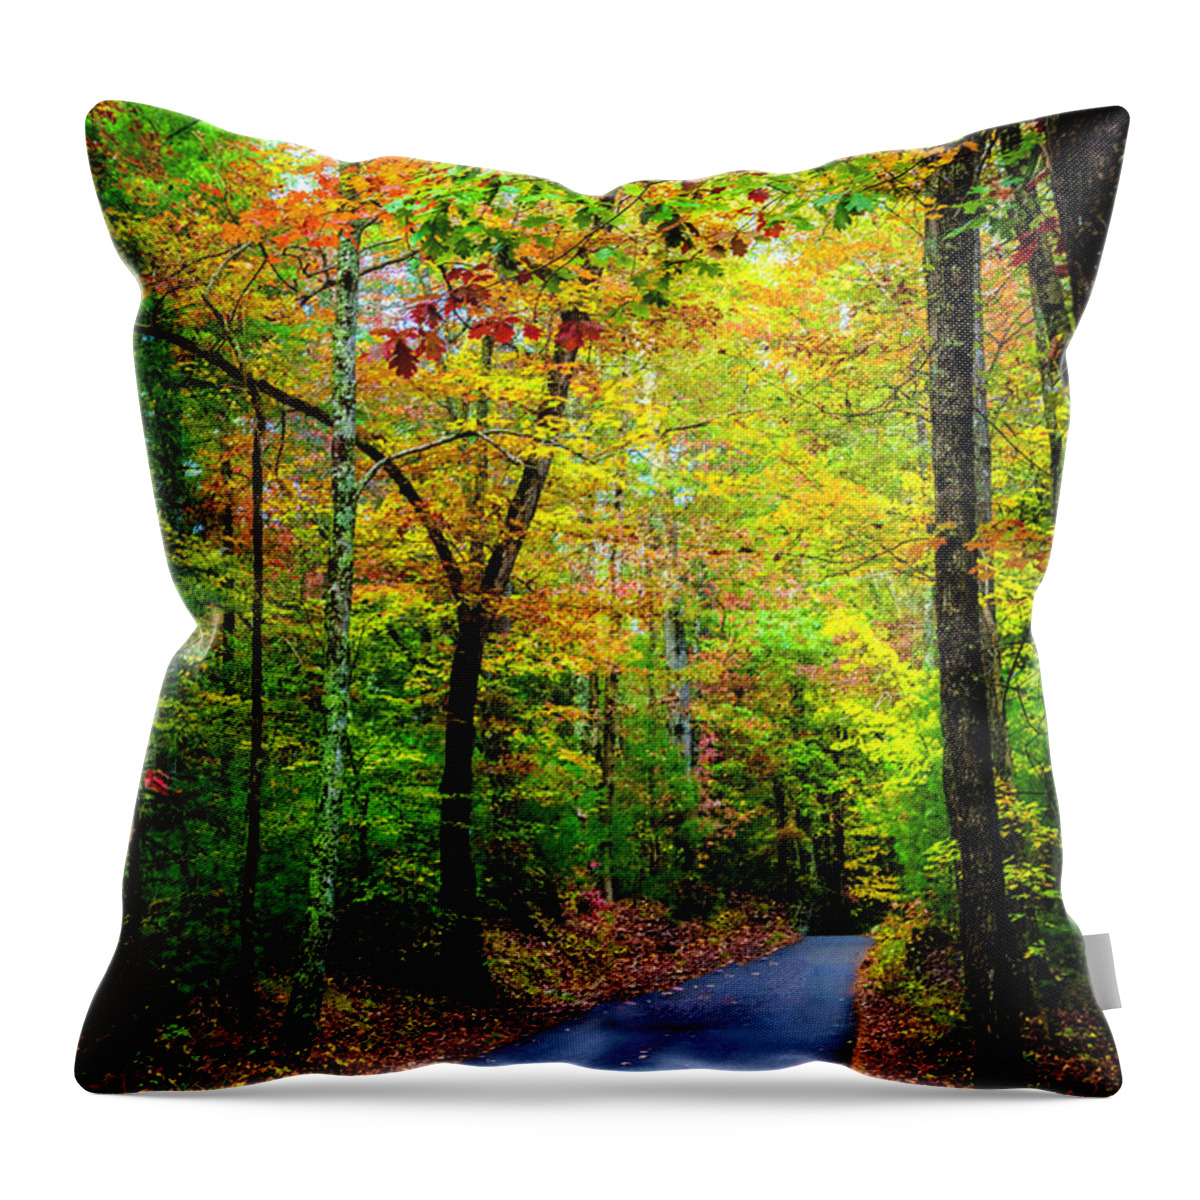 Appalachia Throw Pillow featuring the photograph Smoky Mountain Autumn Colors by Debra and Dave Vanderlaan